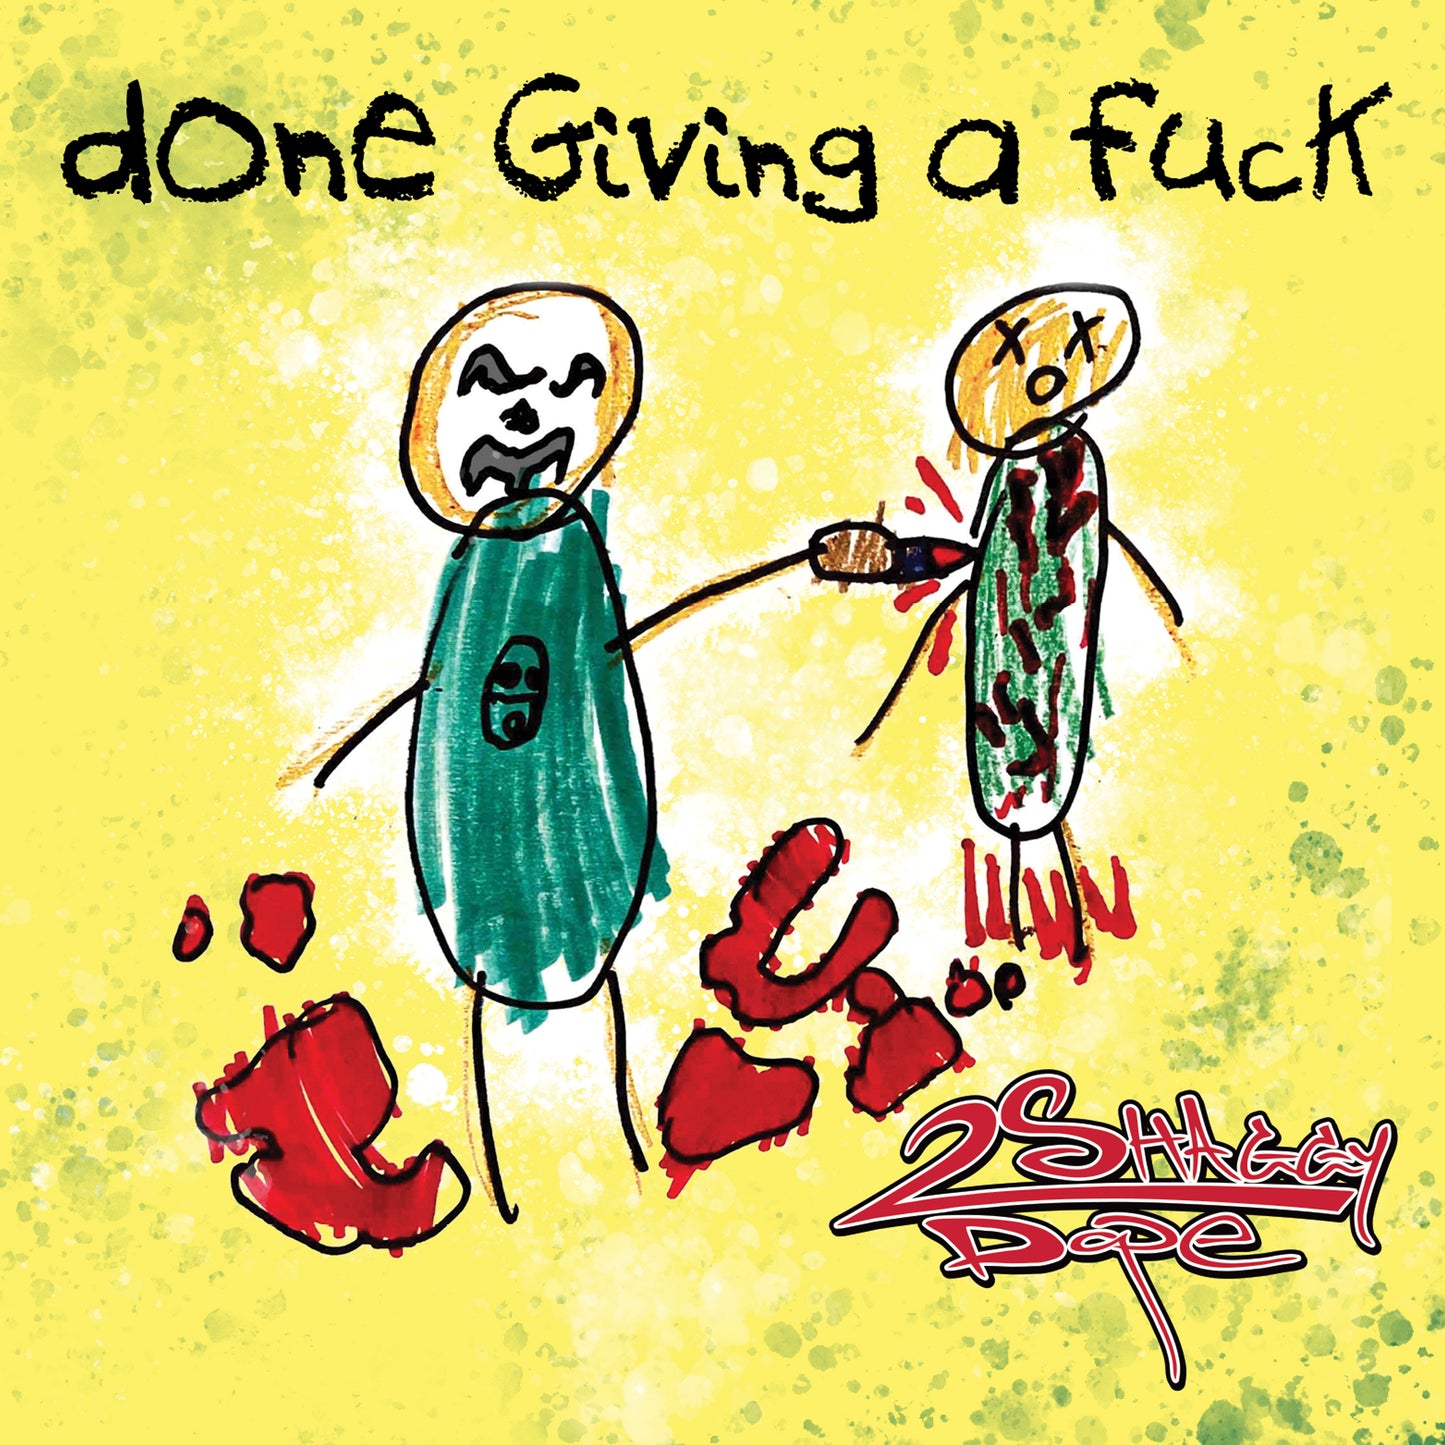 Shaggy 2 Dope - done Giving a fuck CD Single